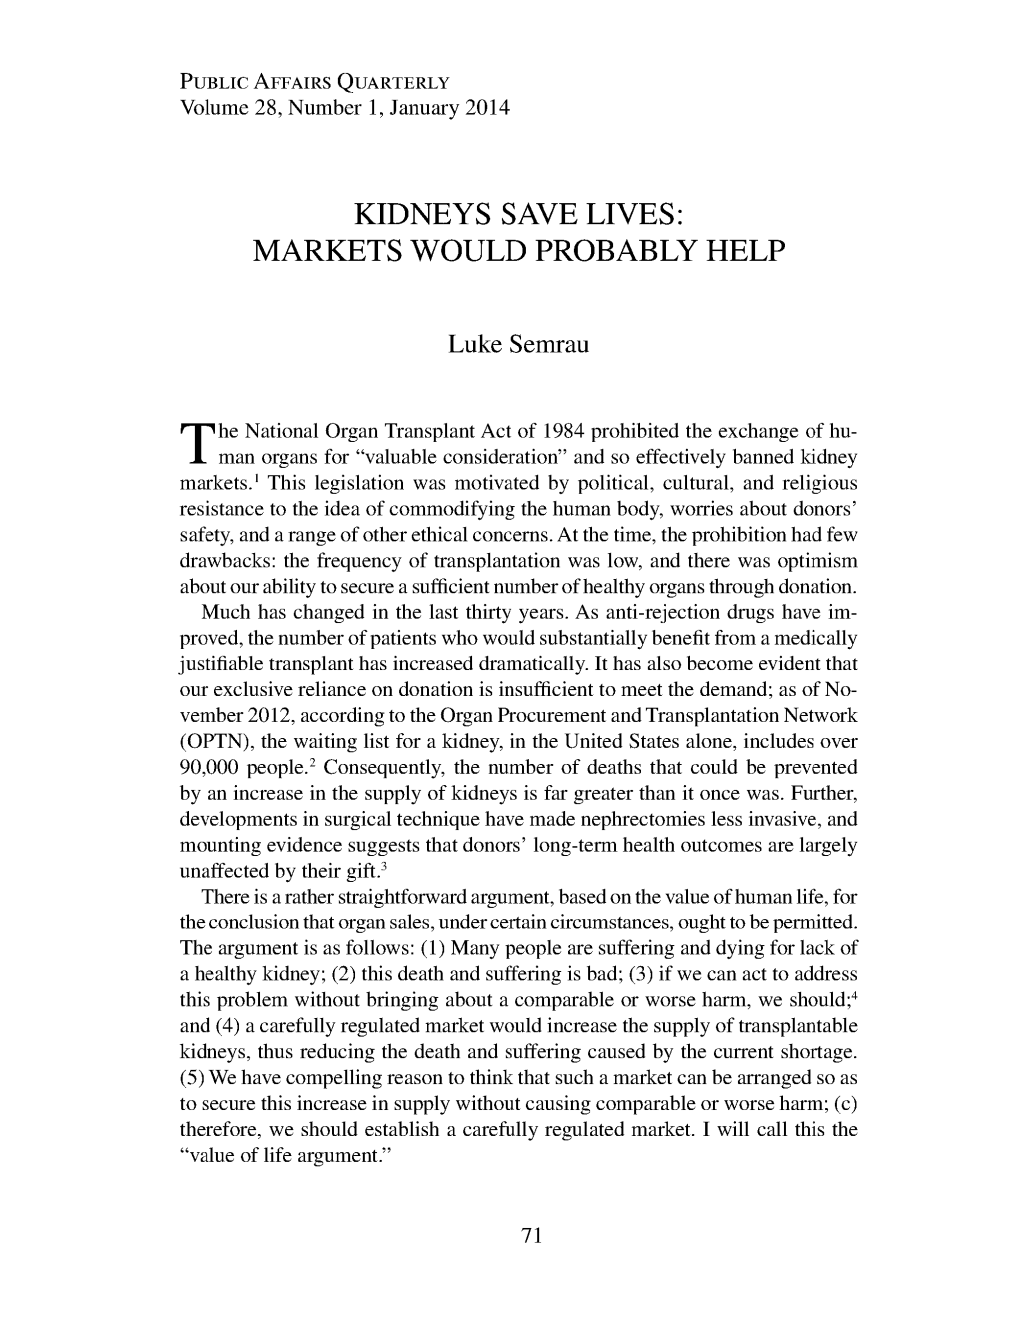 Kidneys Save Lives: Markets Would Probably Help